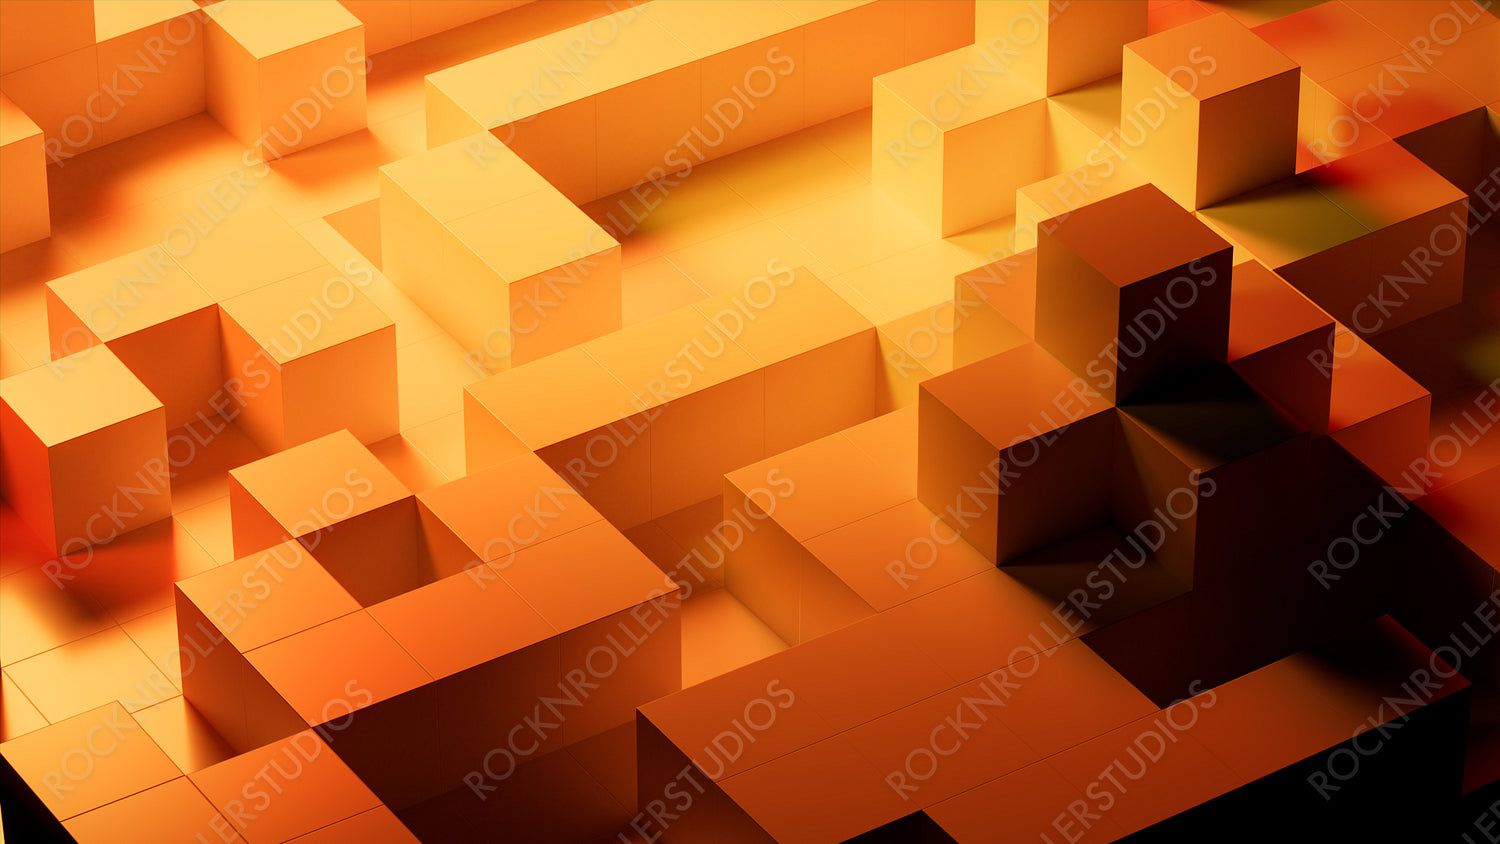 Neatly Aligned Glossy Blocks. Orange and Yellow, Contemporary Tech Background. 3D Render.